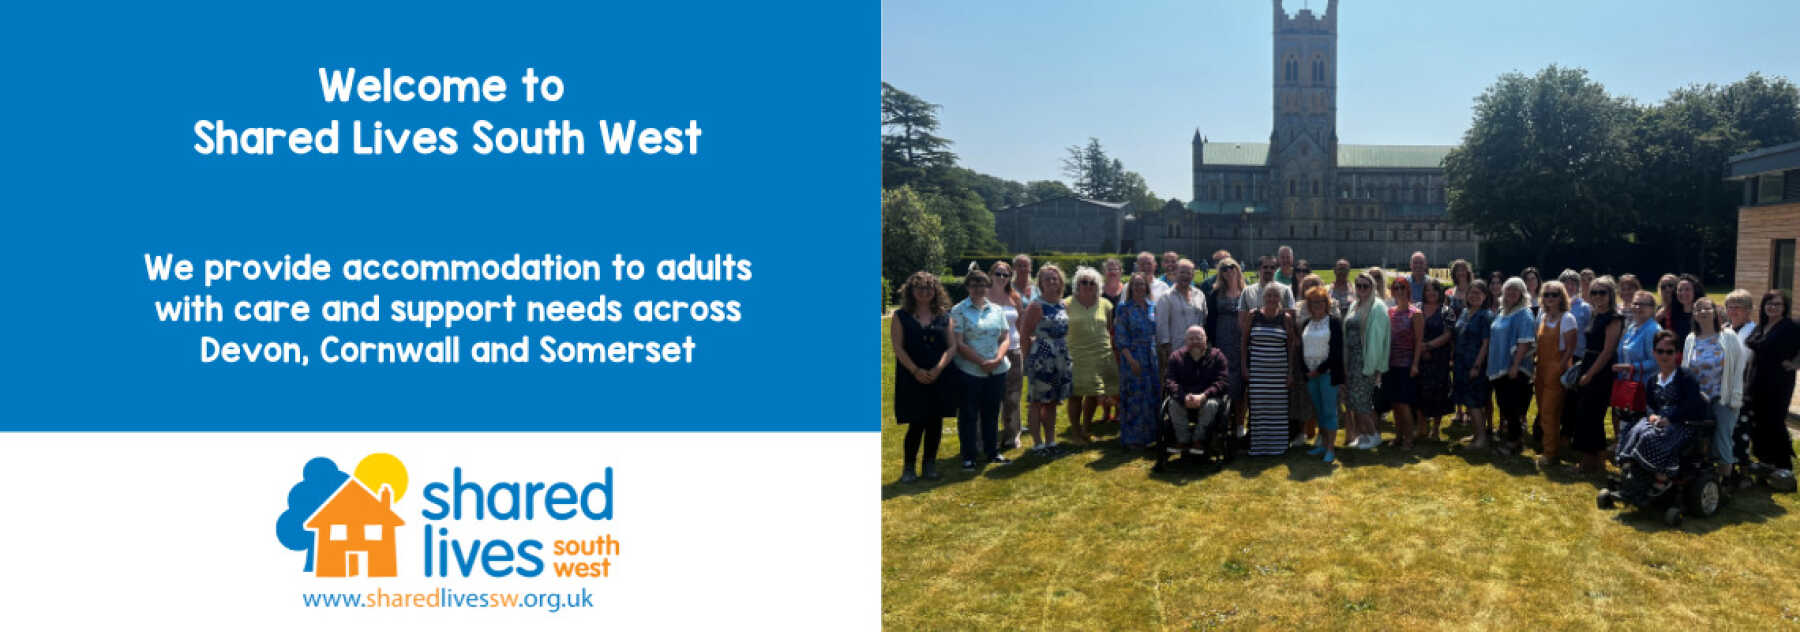 Featured Image for Shared Lives South West